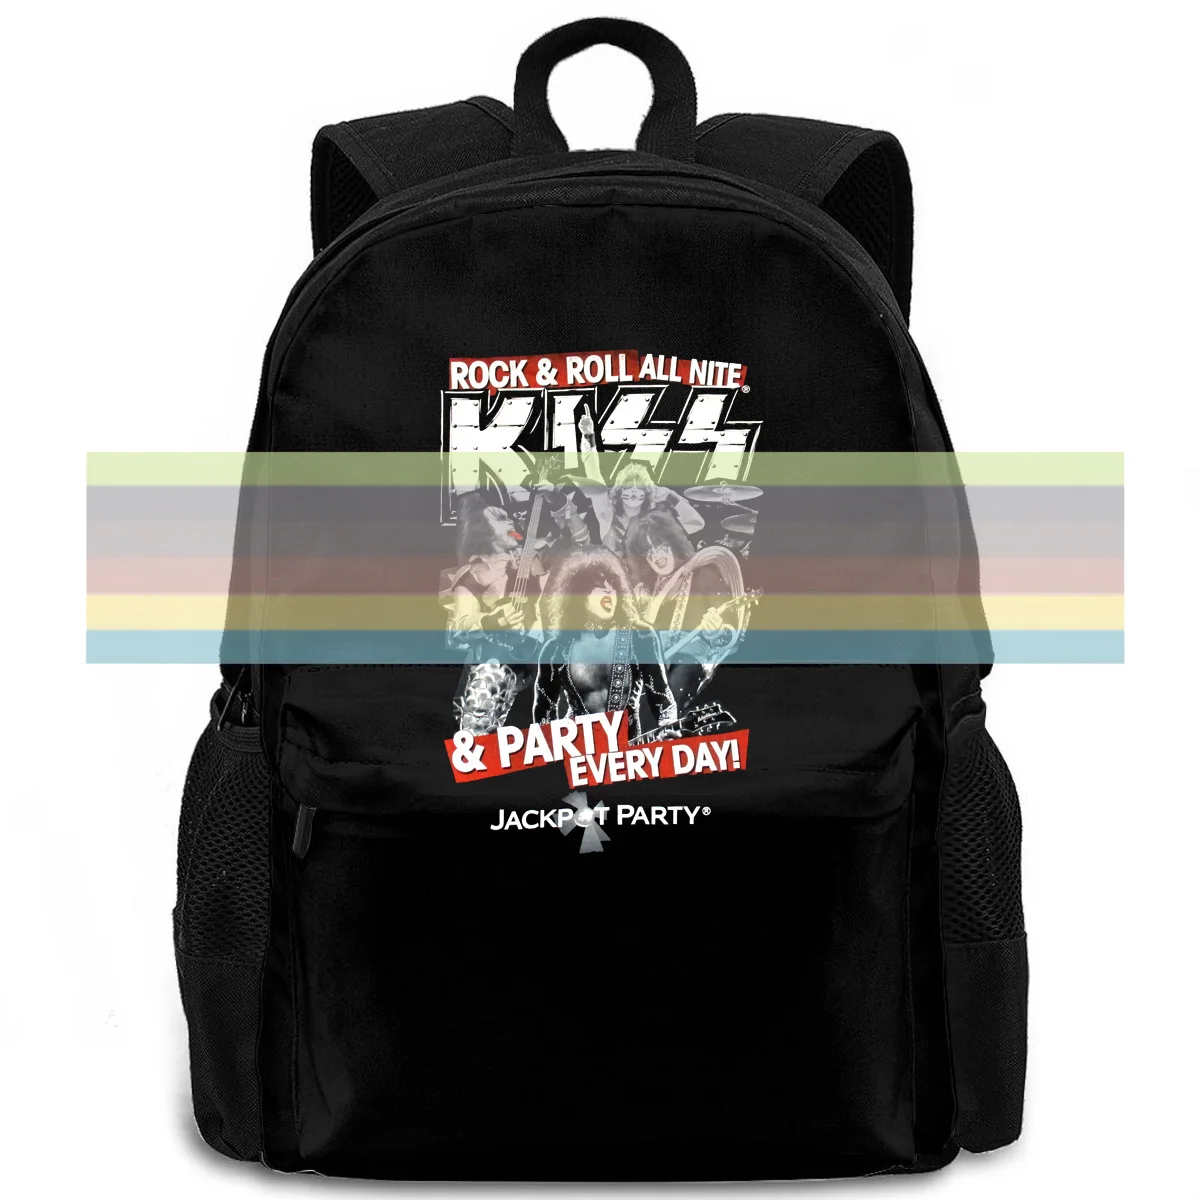 

KISS "JACKPOT PARTY" BLACK NEW OFFICIAL ADULT BAND MUSIC ROCK N ROLL Printed women men backpack laptop travel school adult